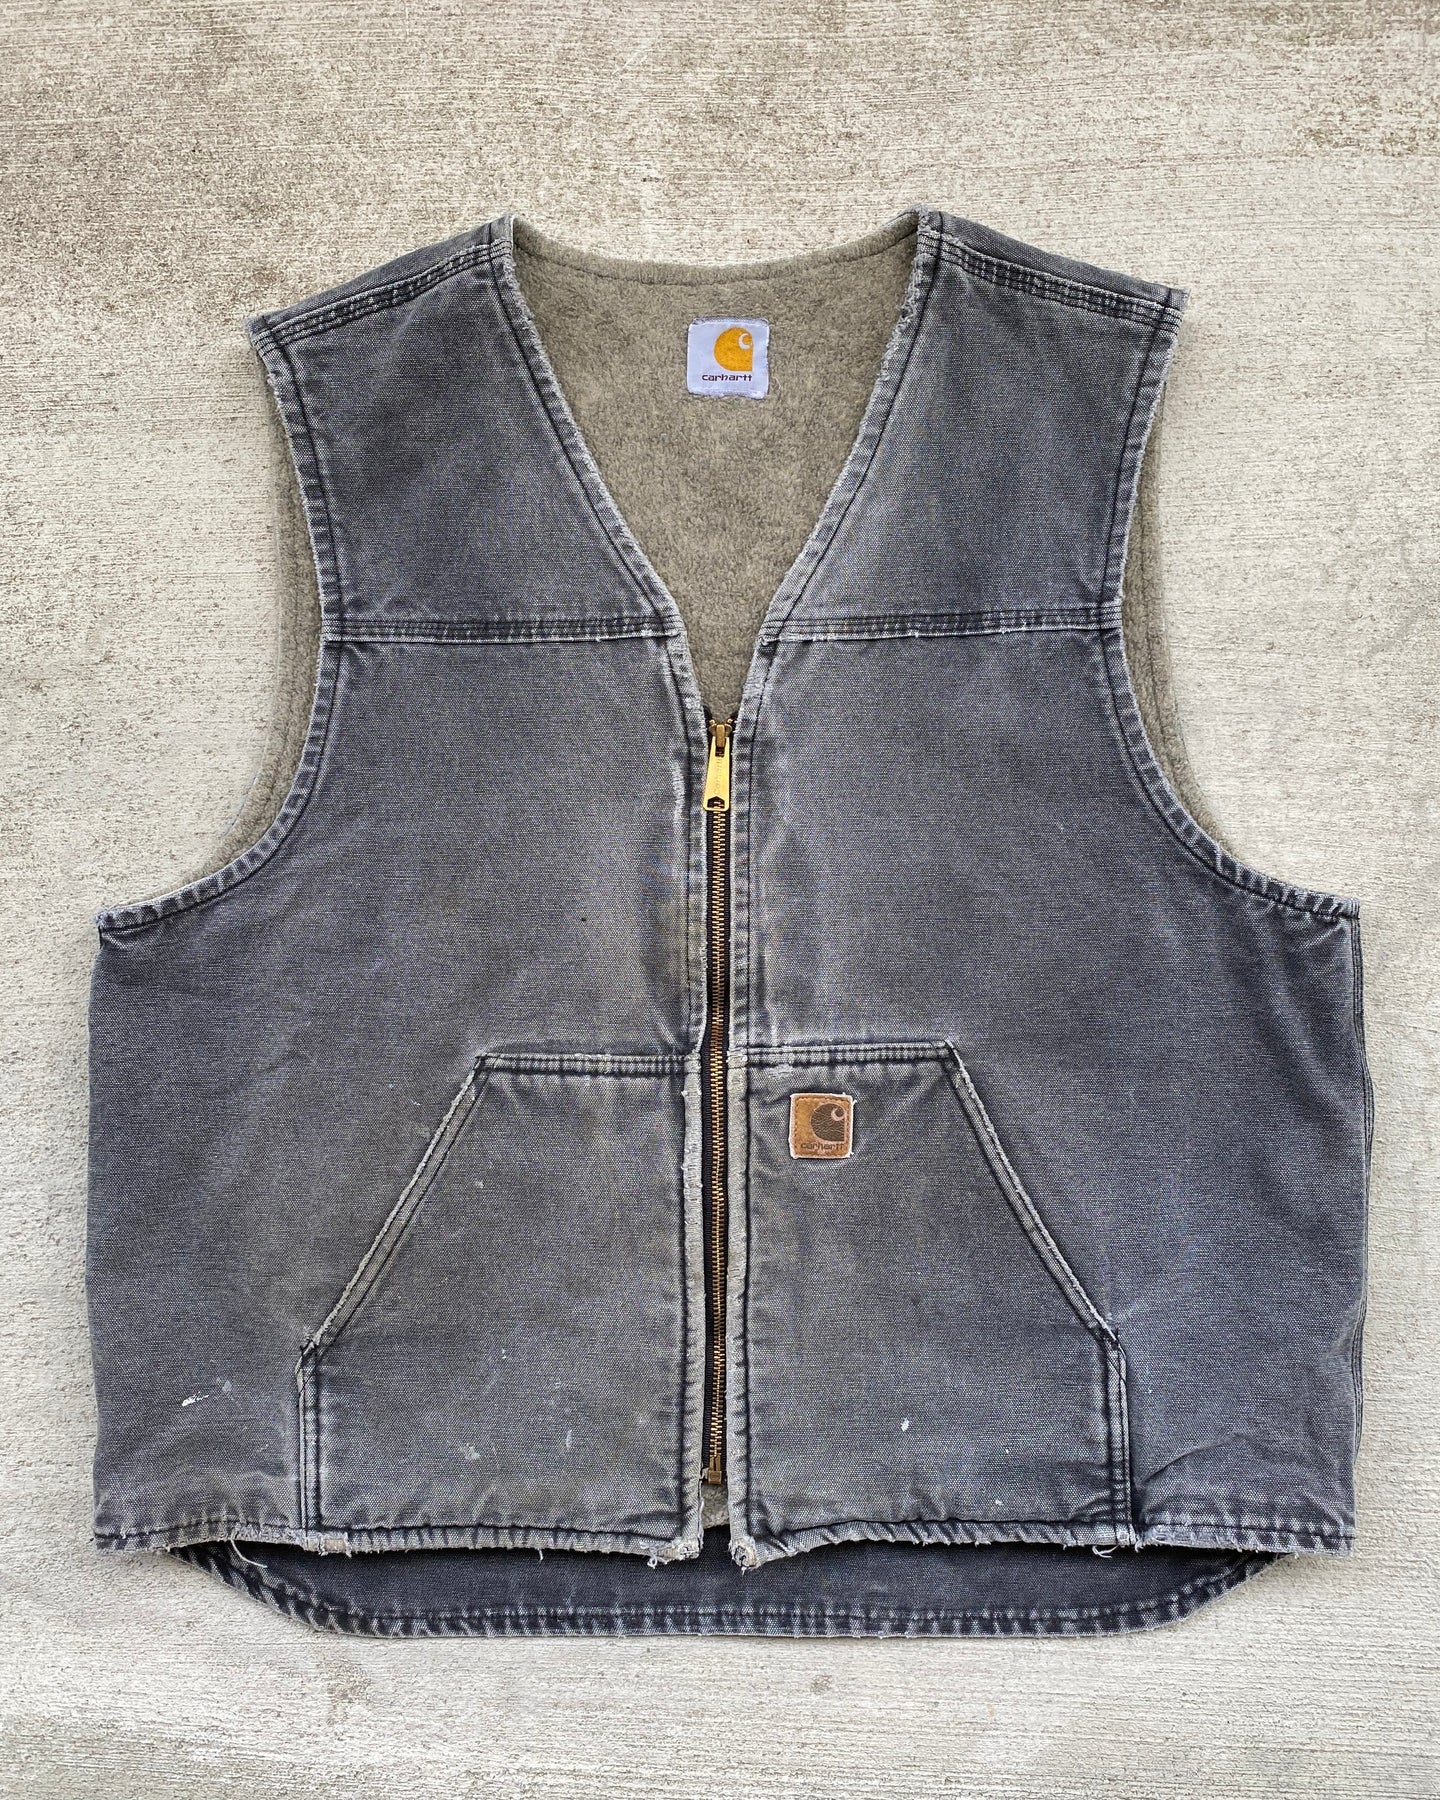 1990s Carhartt Charcoal Well Worn Work Vest - Size X-Large